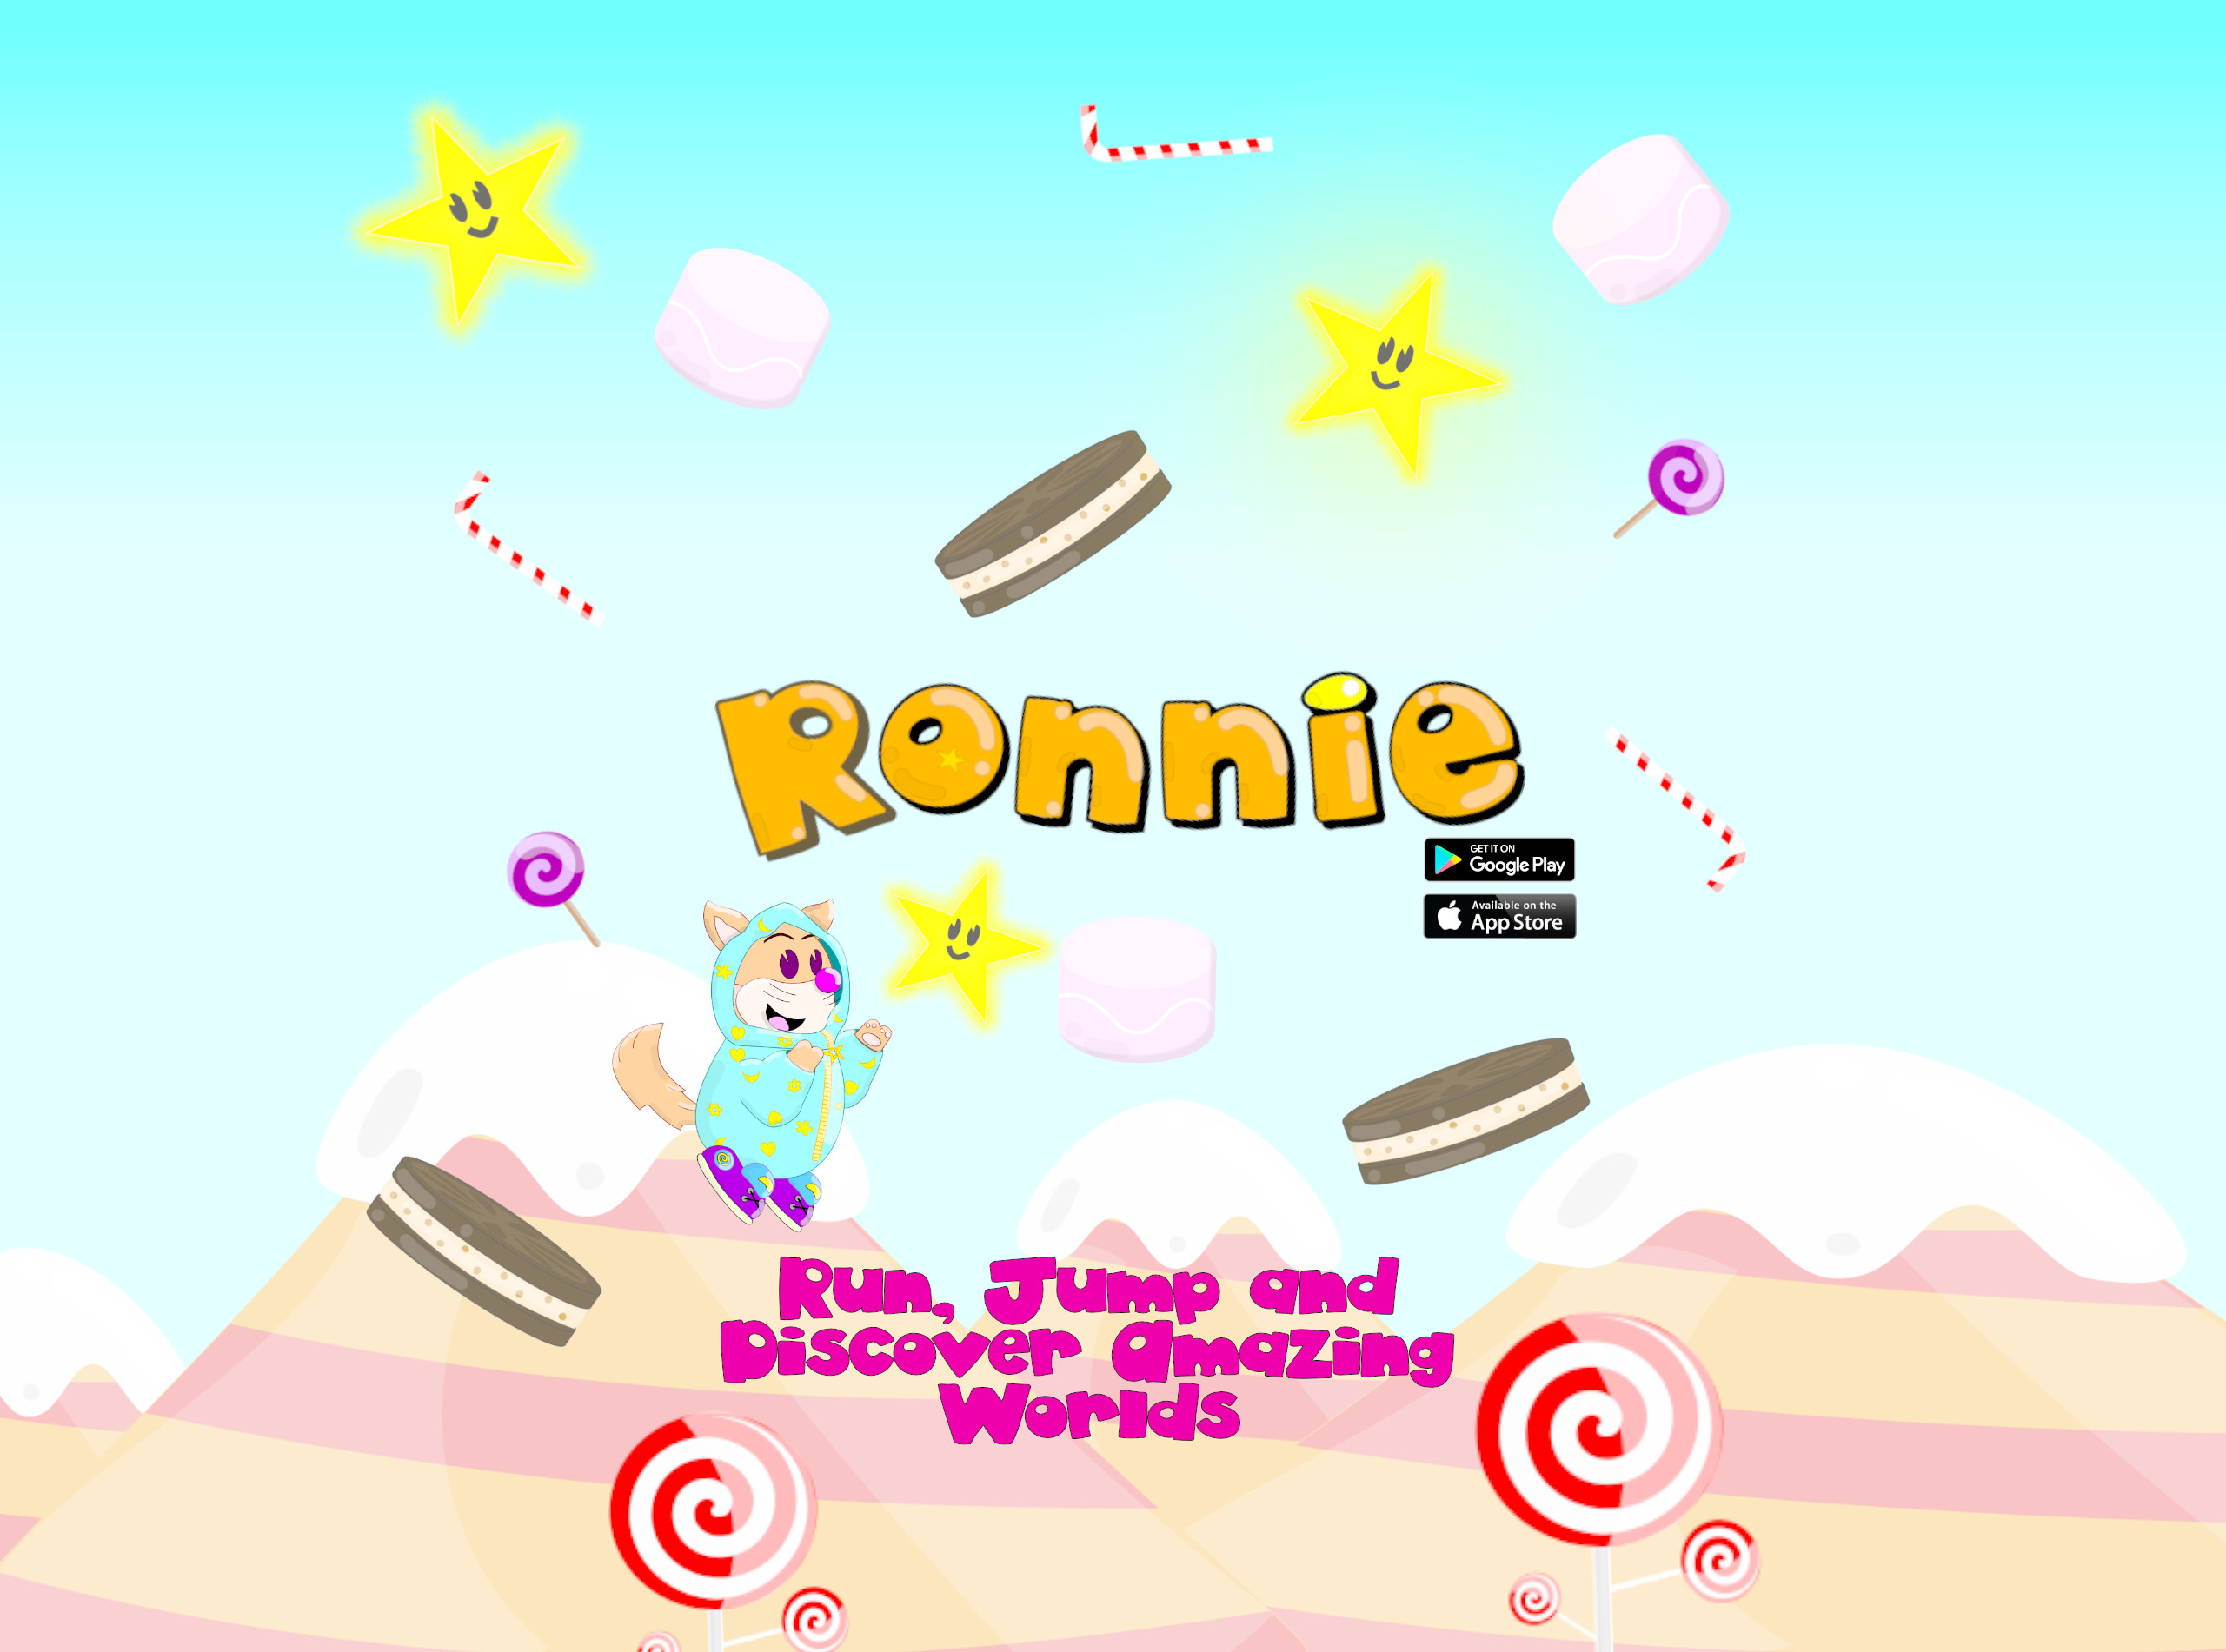 ACKOSMIC Games Website Ronnie Game Promo Image. Download Ronnie Game for Android and iOS Devices for Free